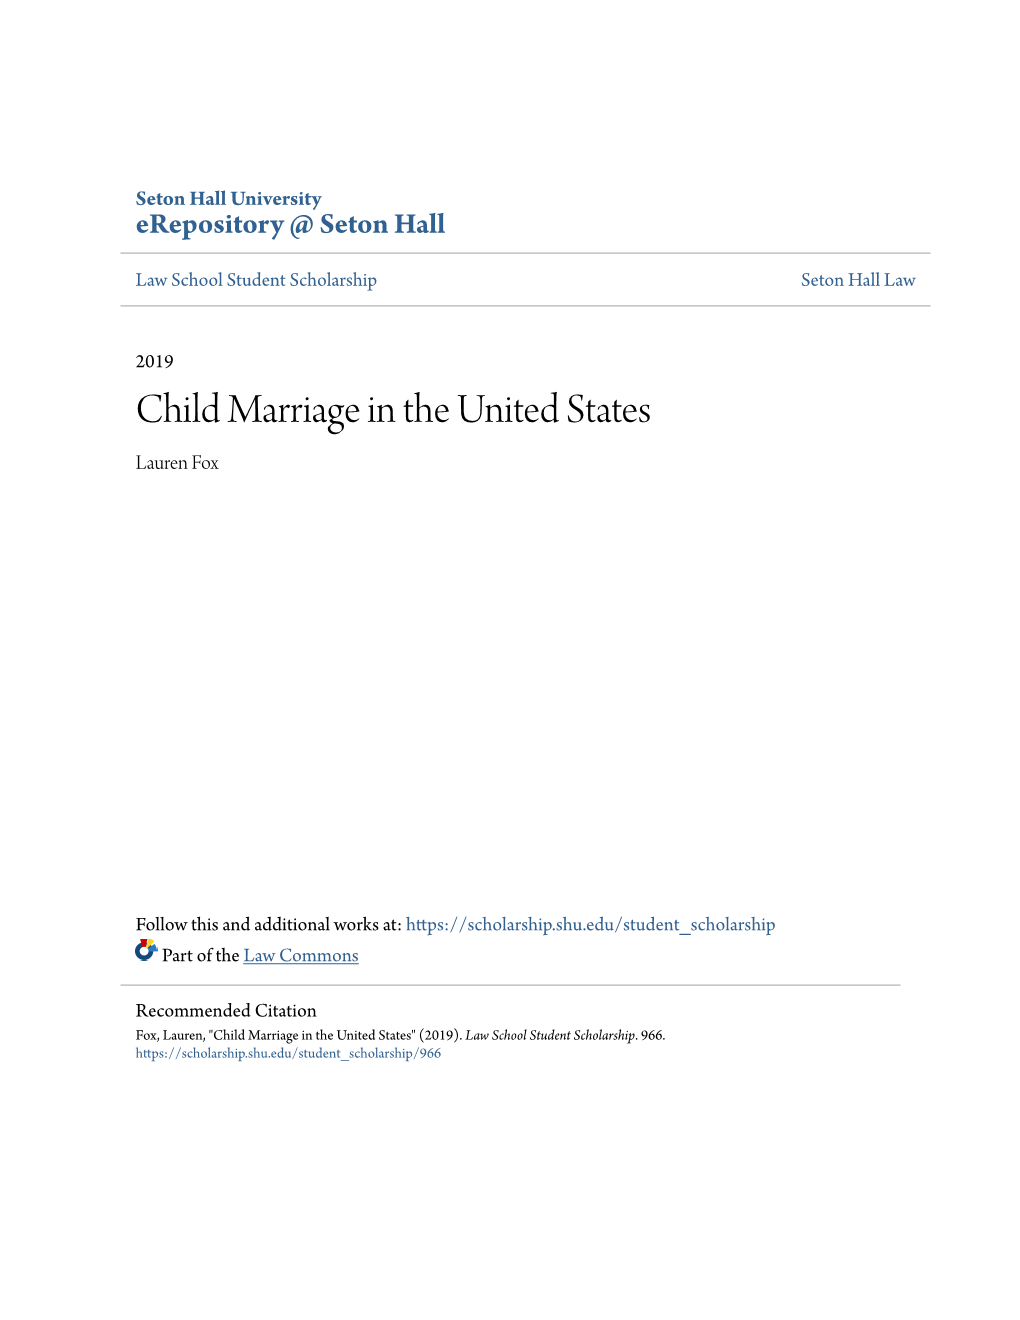 Child Marriage in the United States Lauren Fox